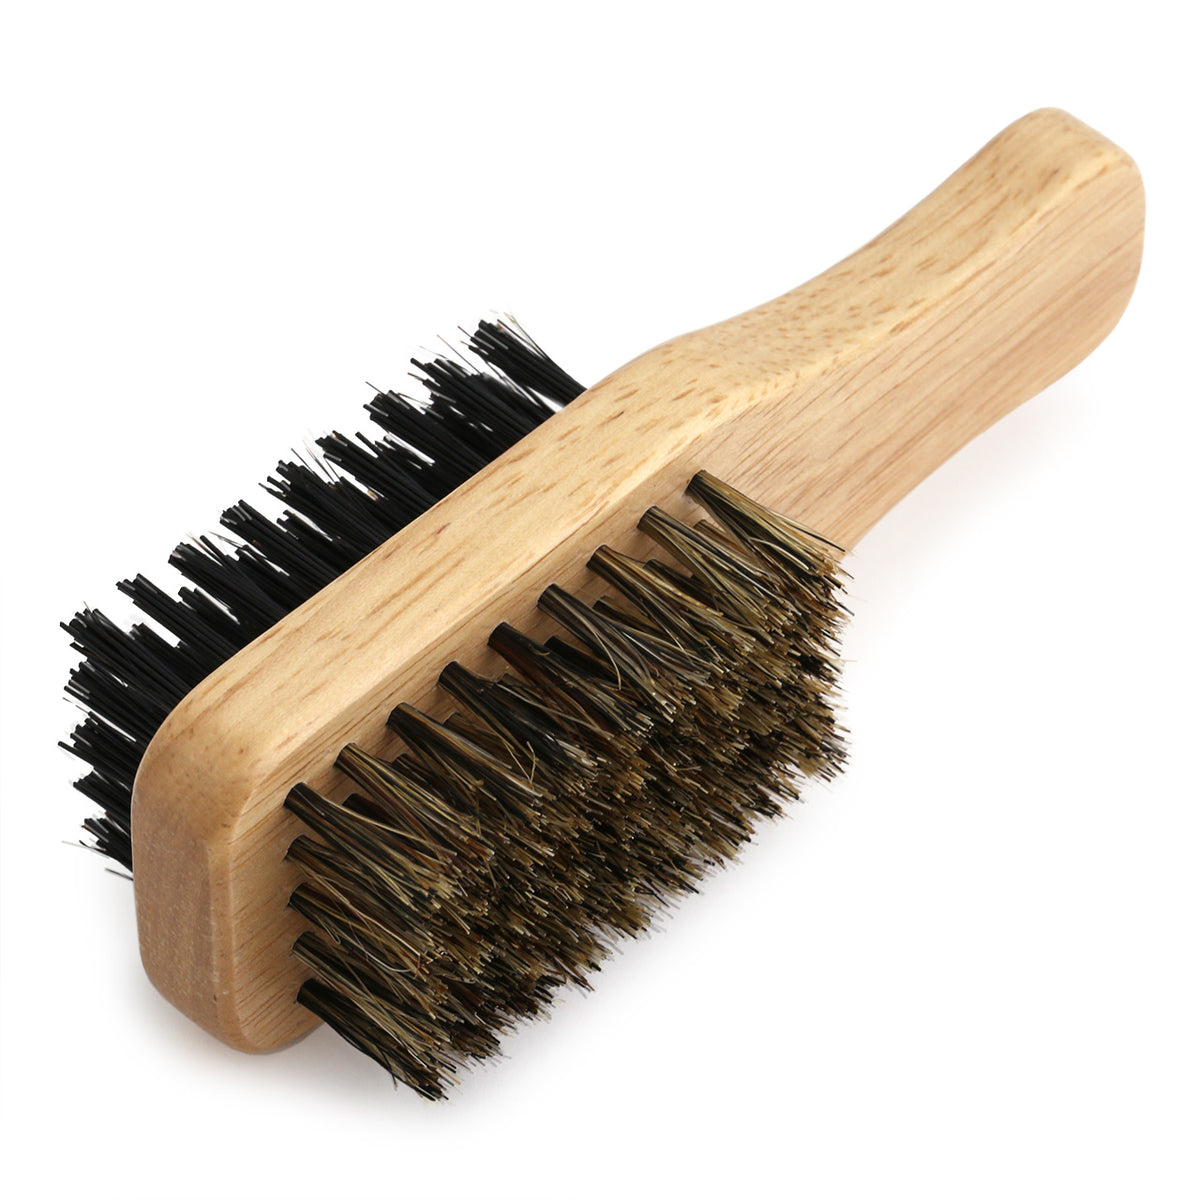 Beard Brush Small, two sided with wooden paddle handle - three quarter view